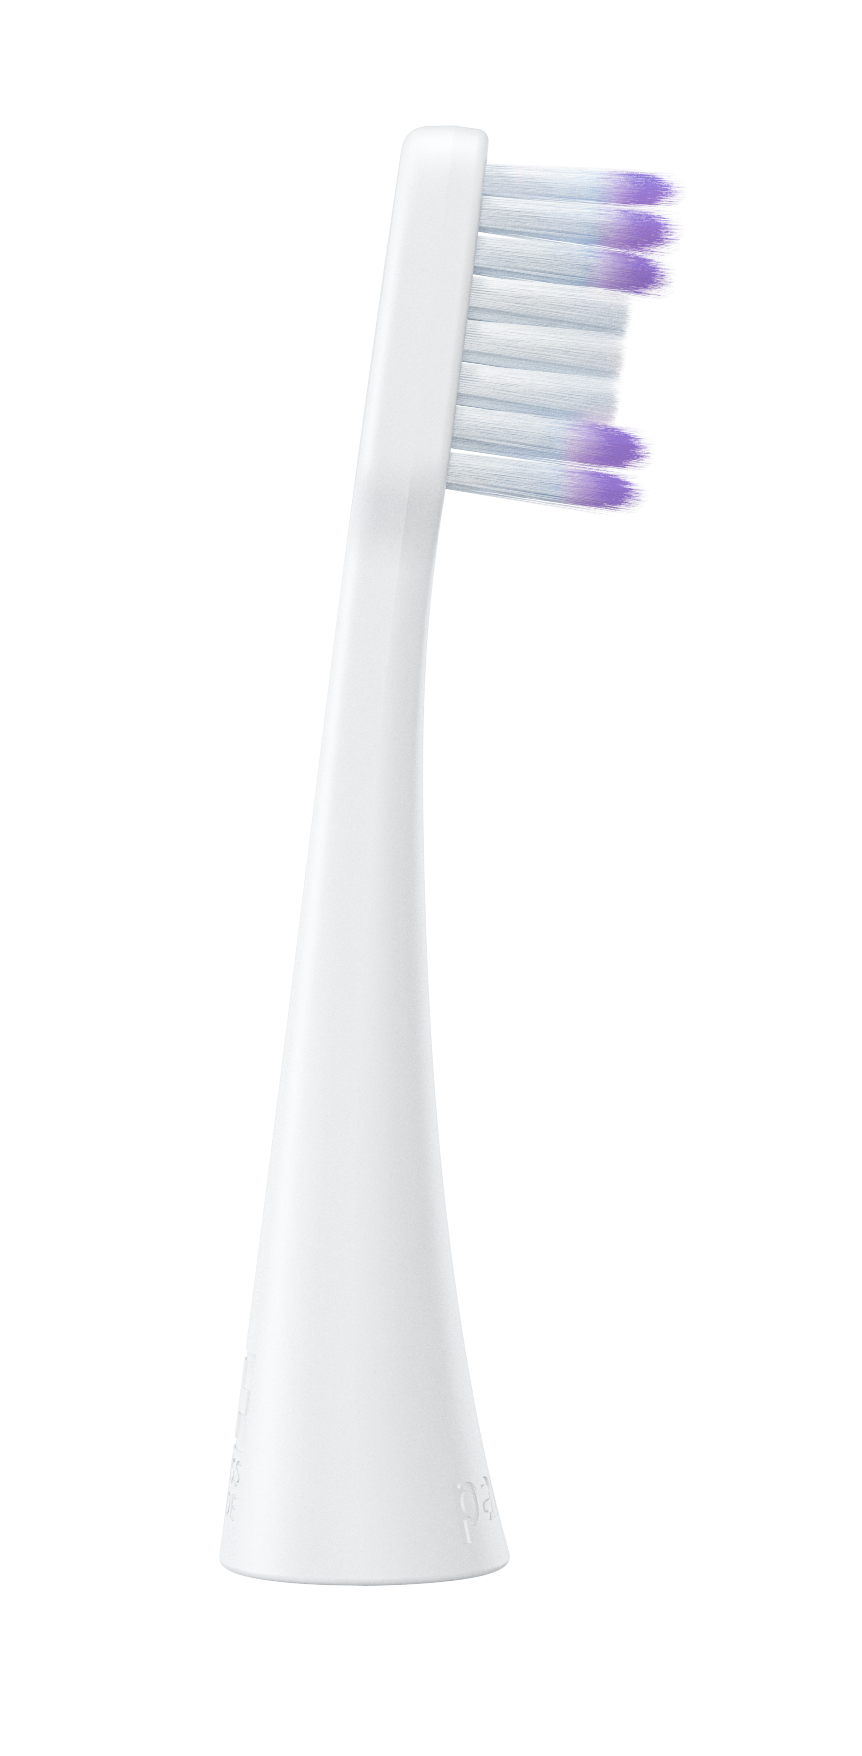 762 paro sonic duo-clean 2 Replacement Heads Sonic Electric Toothbrush